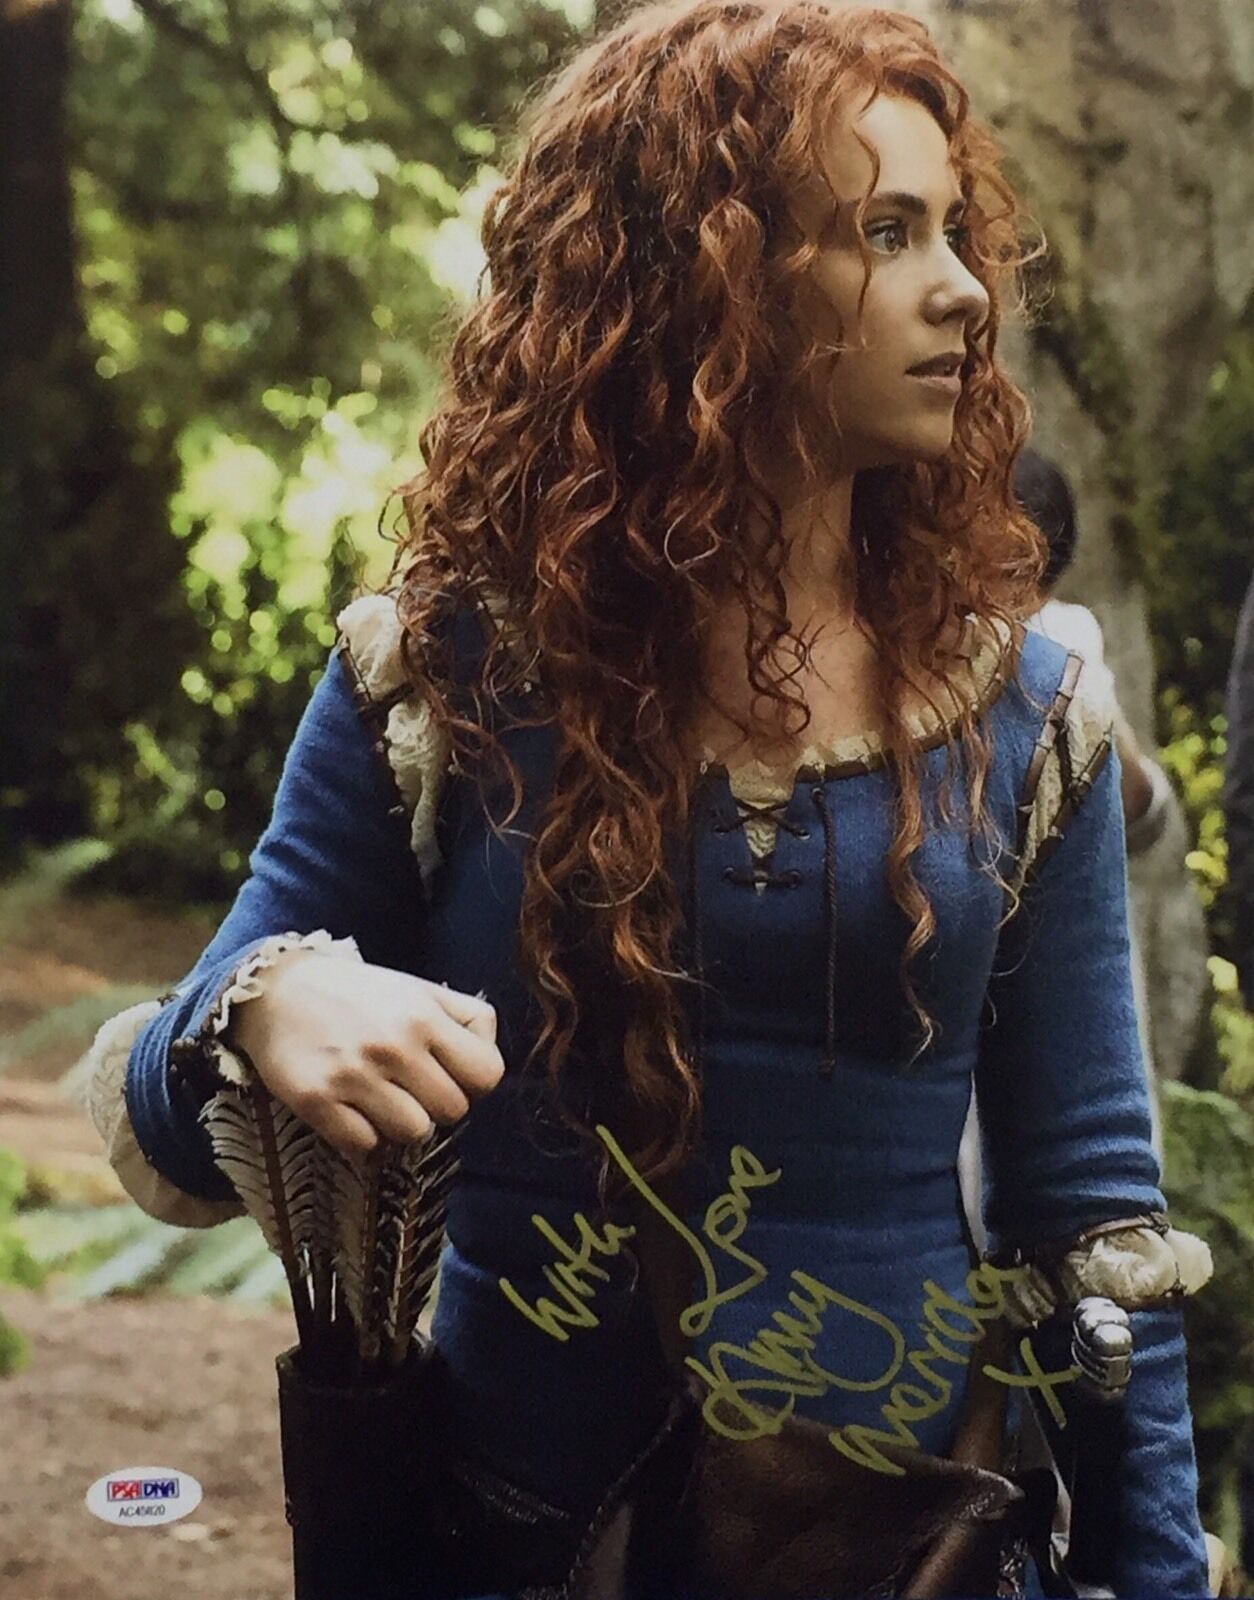 Amy Manson Signed Autographed Once Upon A Time 11x14 Photo Poster painting PSA AC45820